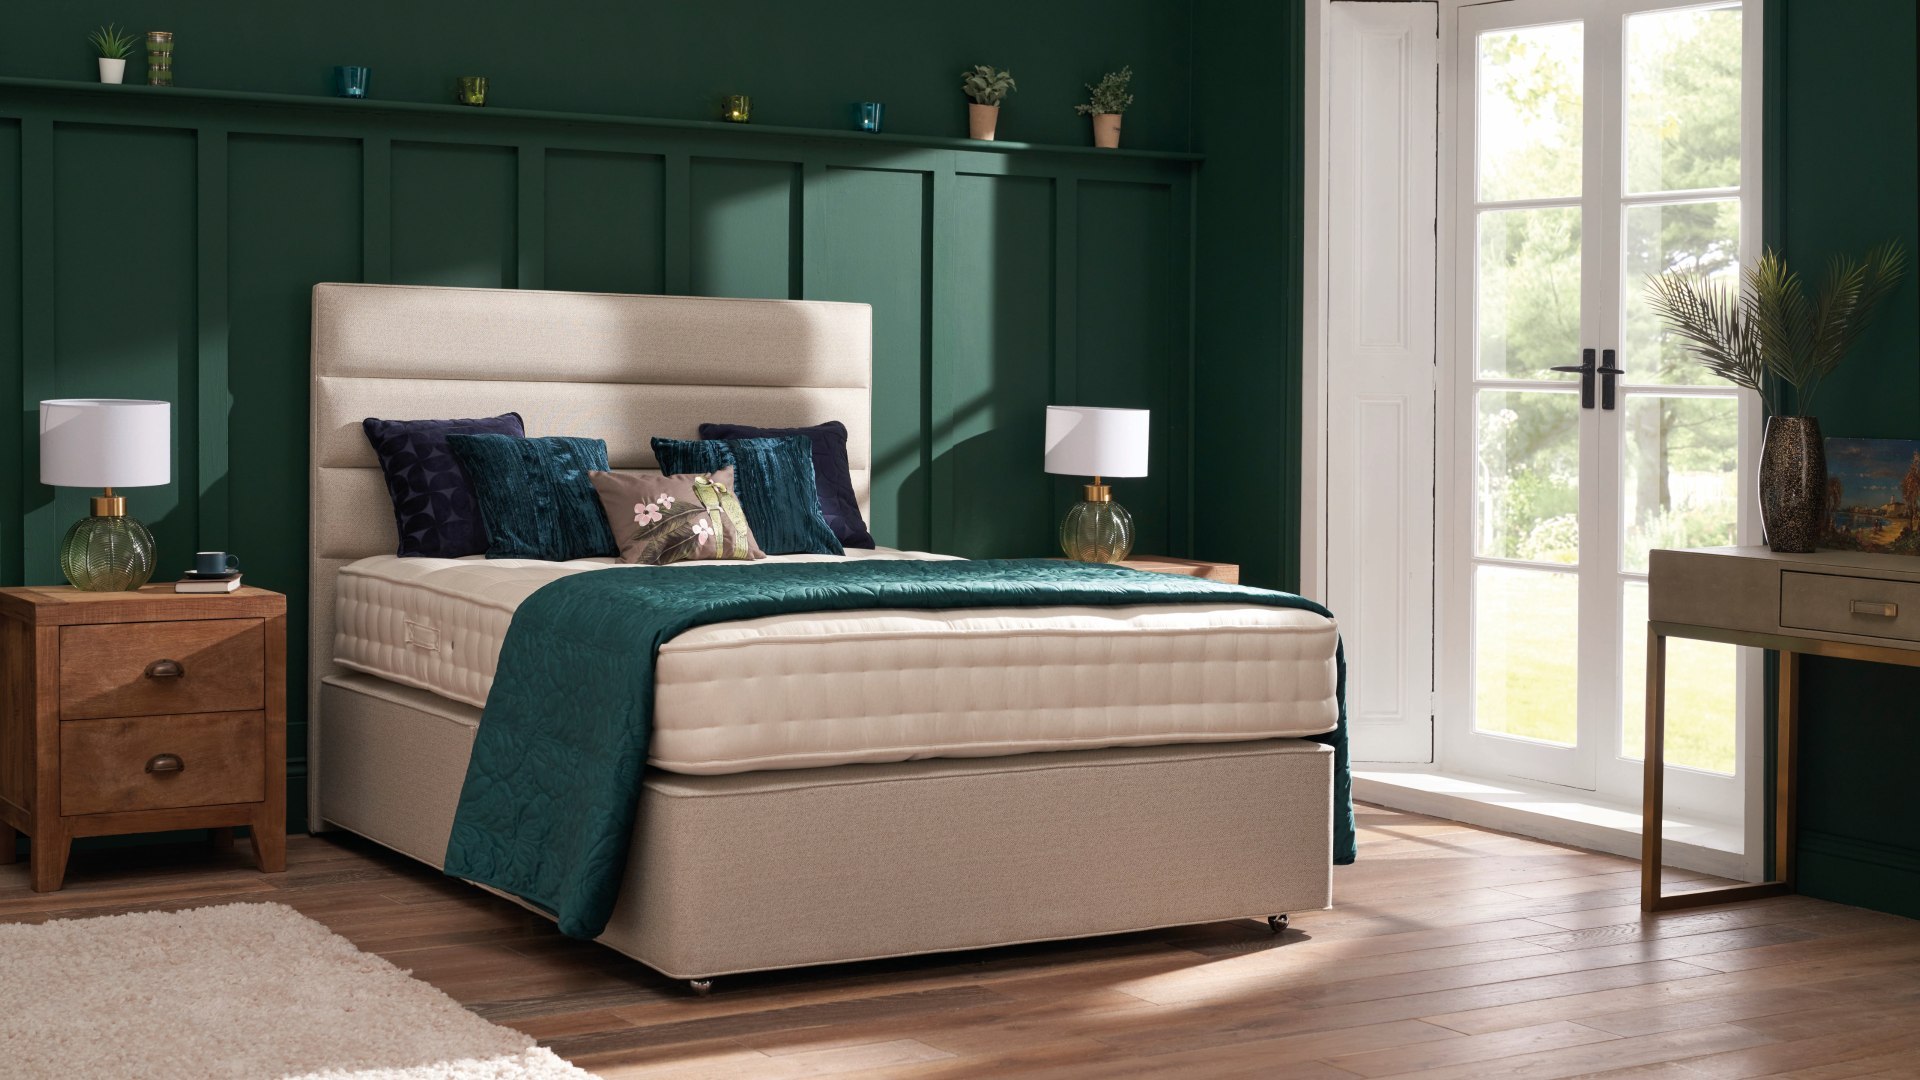 Shop all of our Beds, Mattresses & Bedroom Furniture